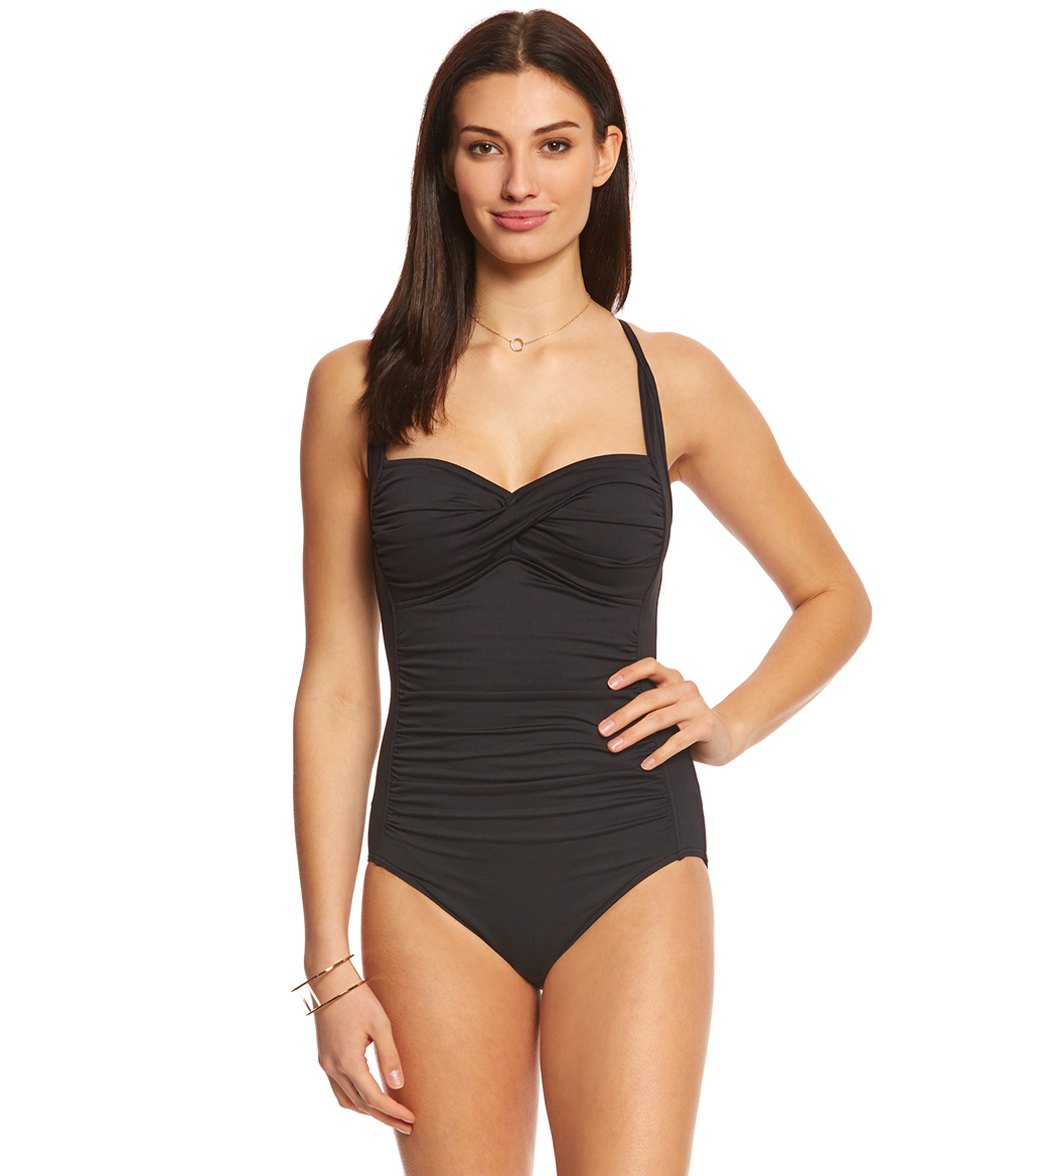 Seafolly Twist Halter Maillot One Piece Swimsuit - Black 6 - Swimoutlet.com